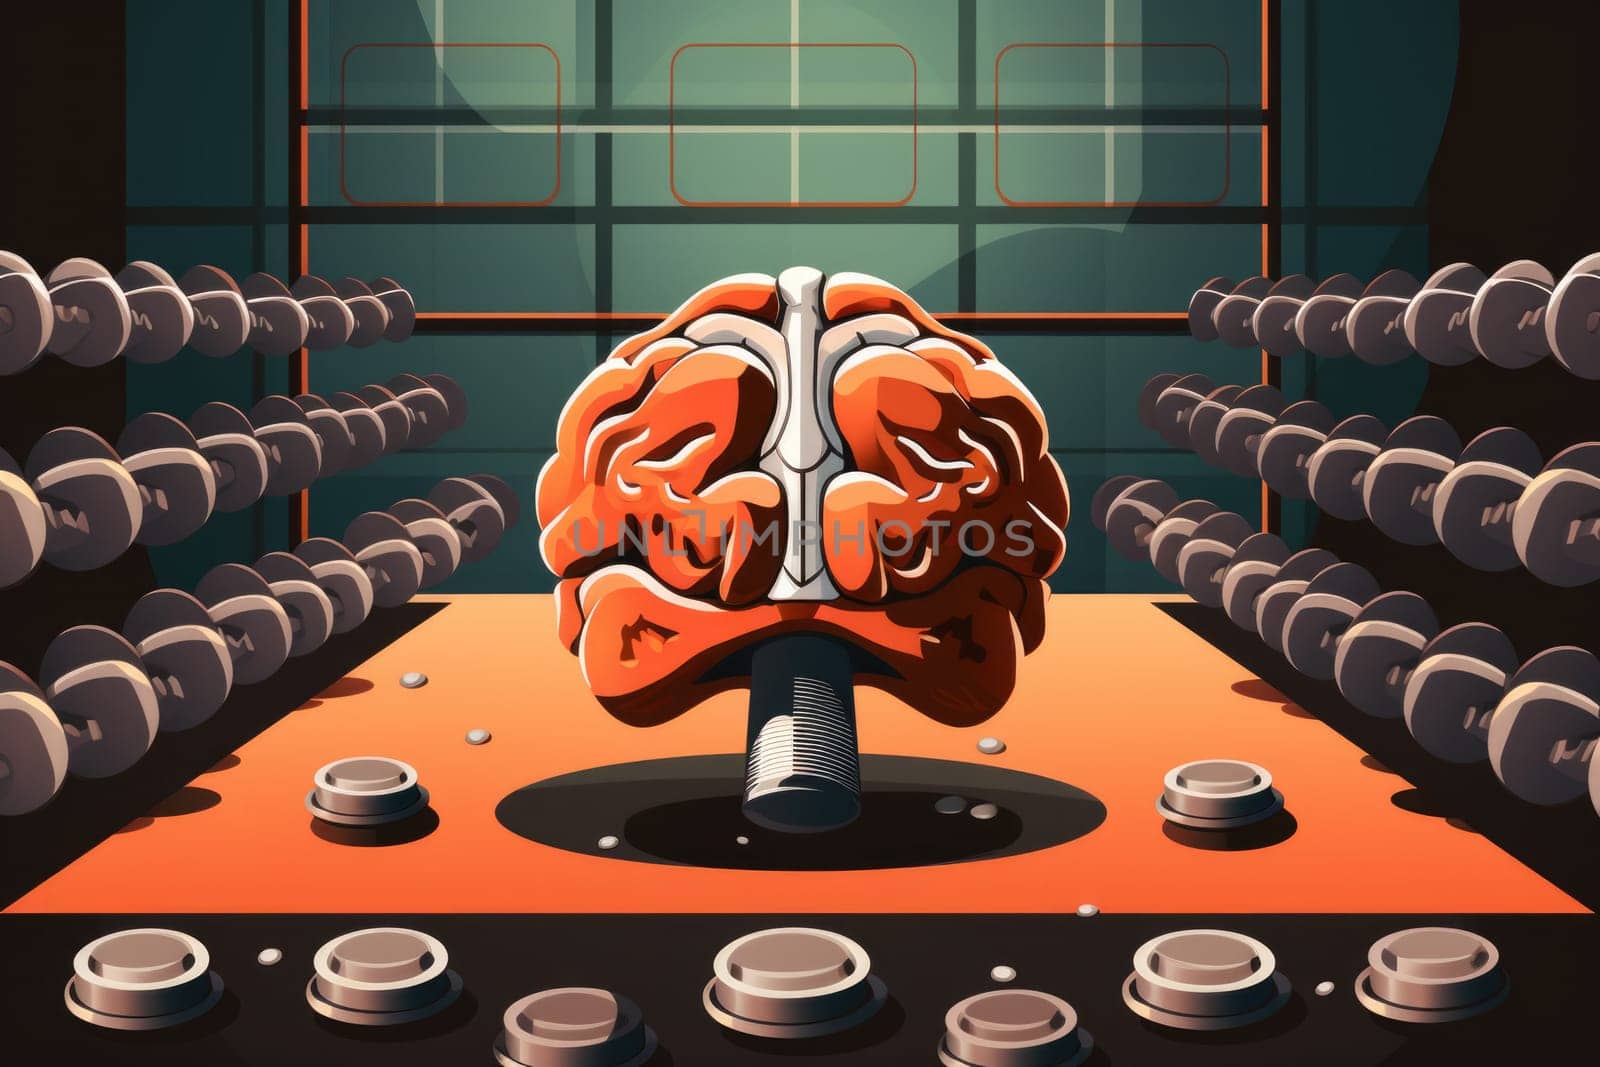 A computer-generated image of a brain located in a room filled with rows of chairs.